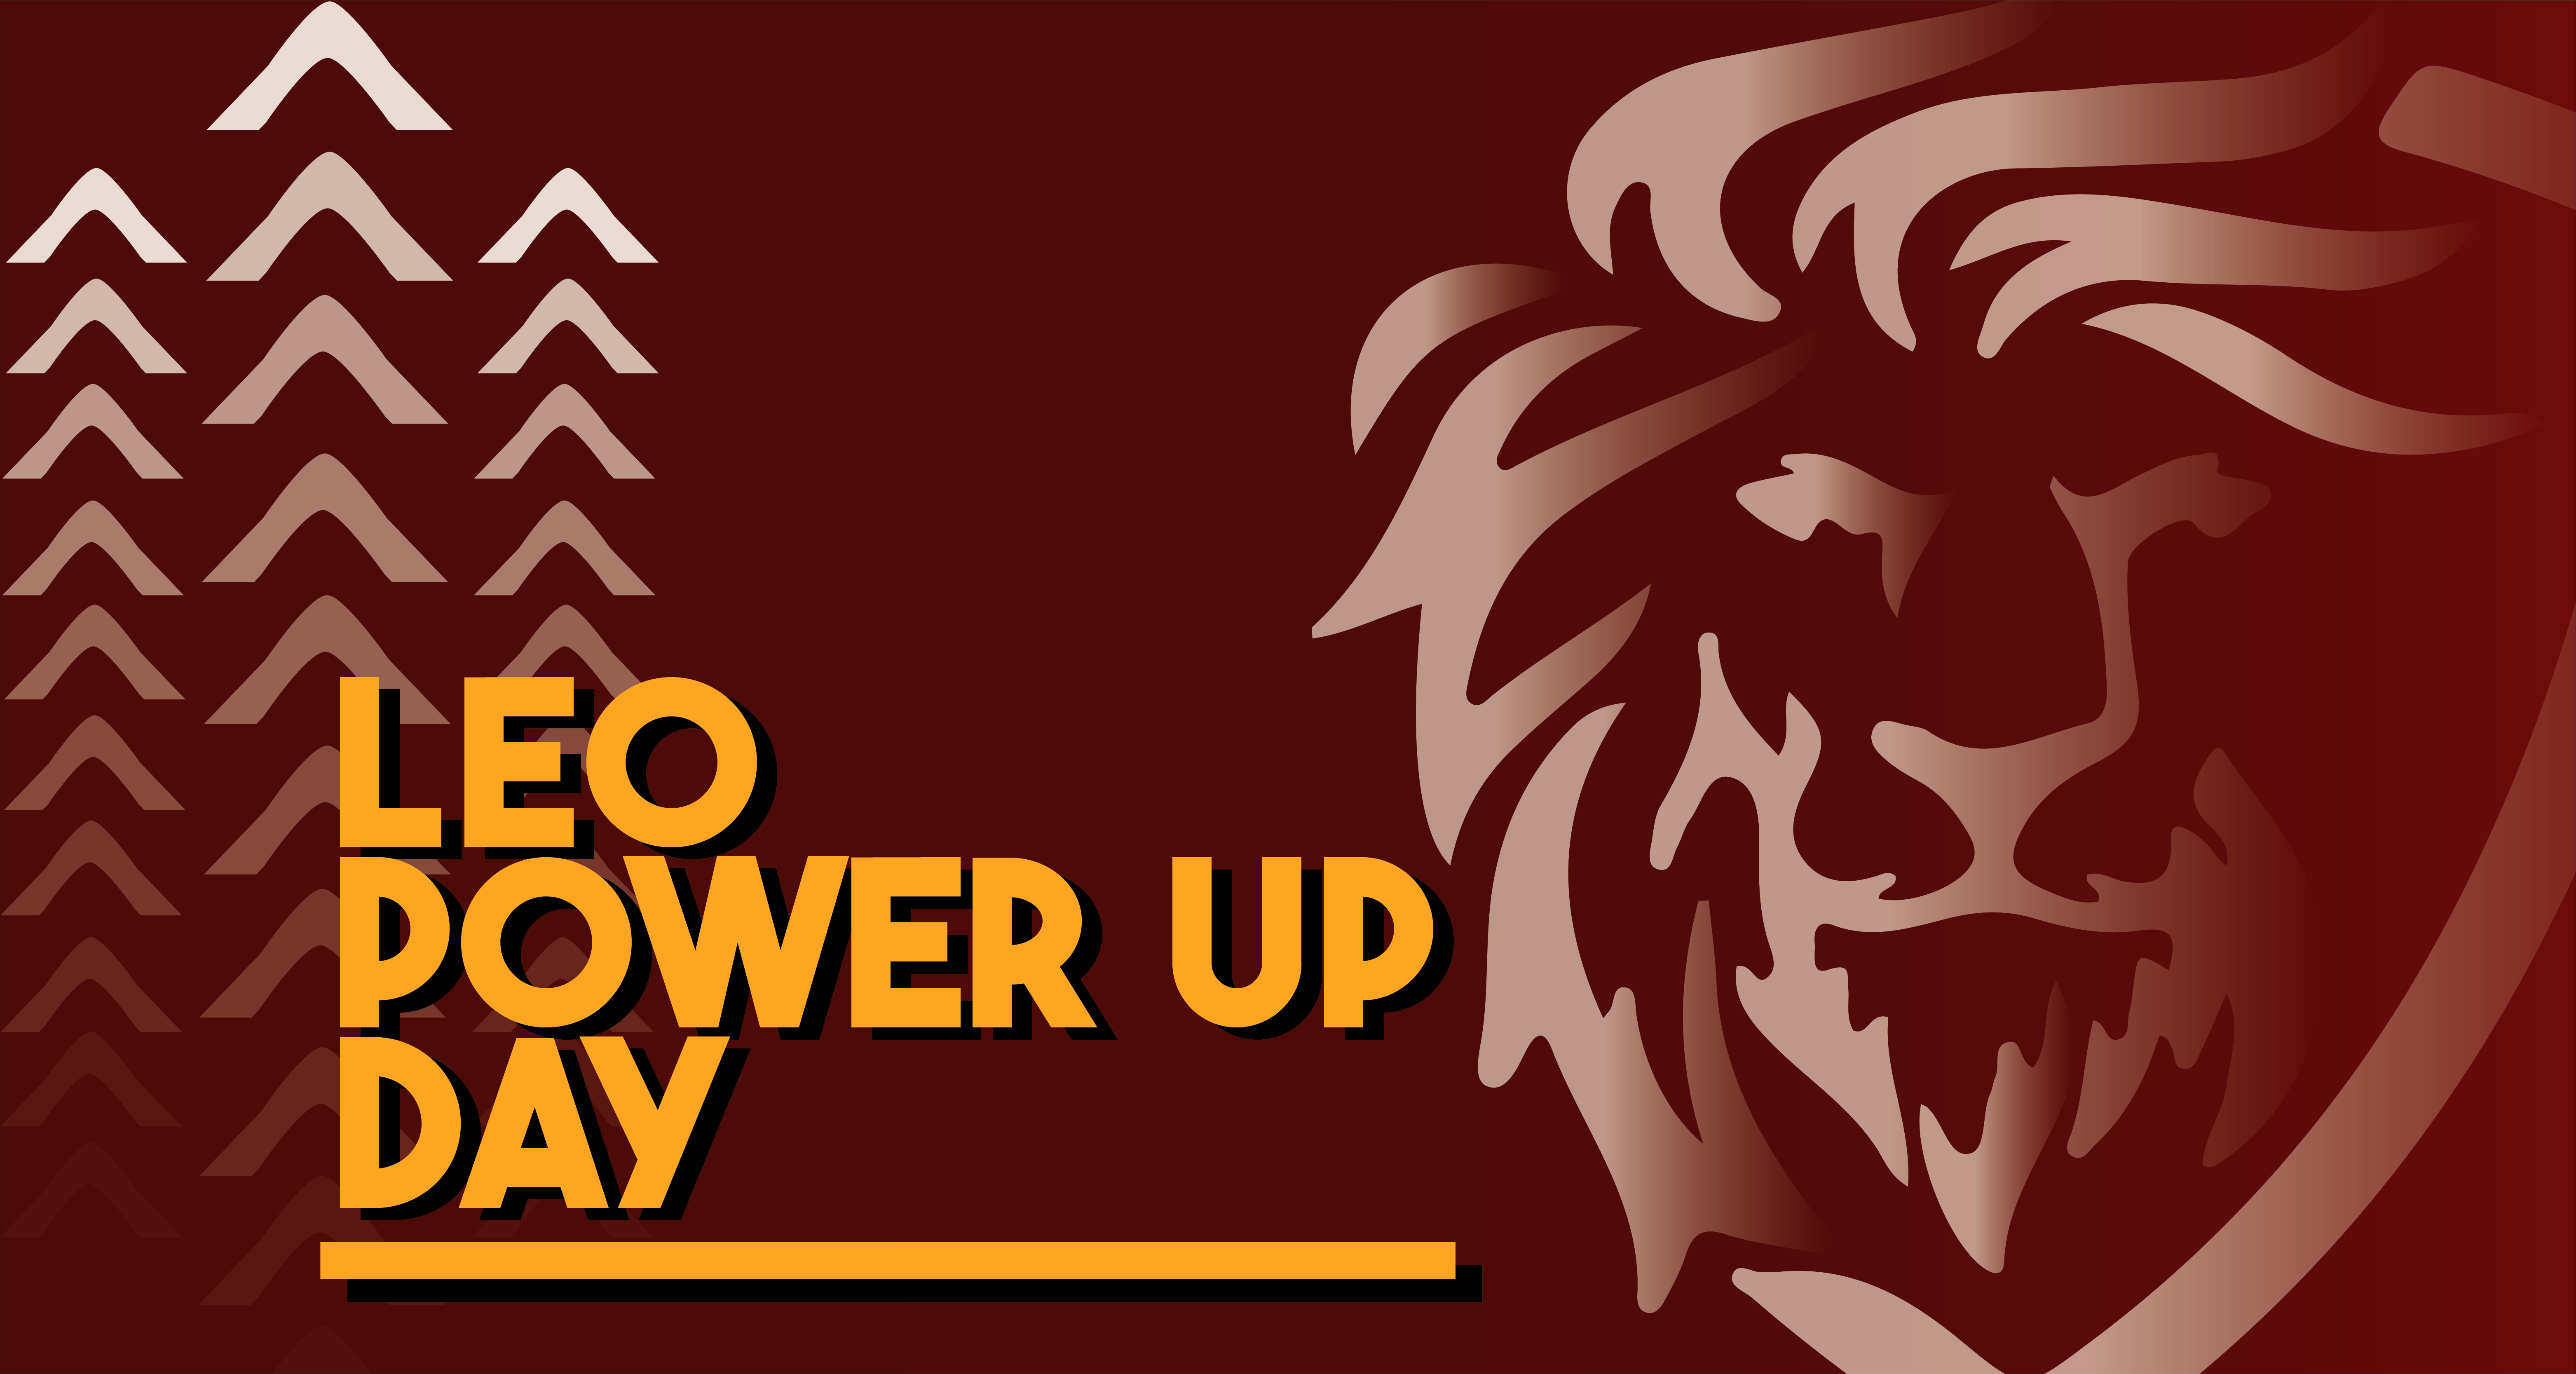 Leo Power Up Day.png